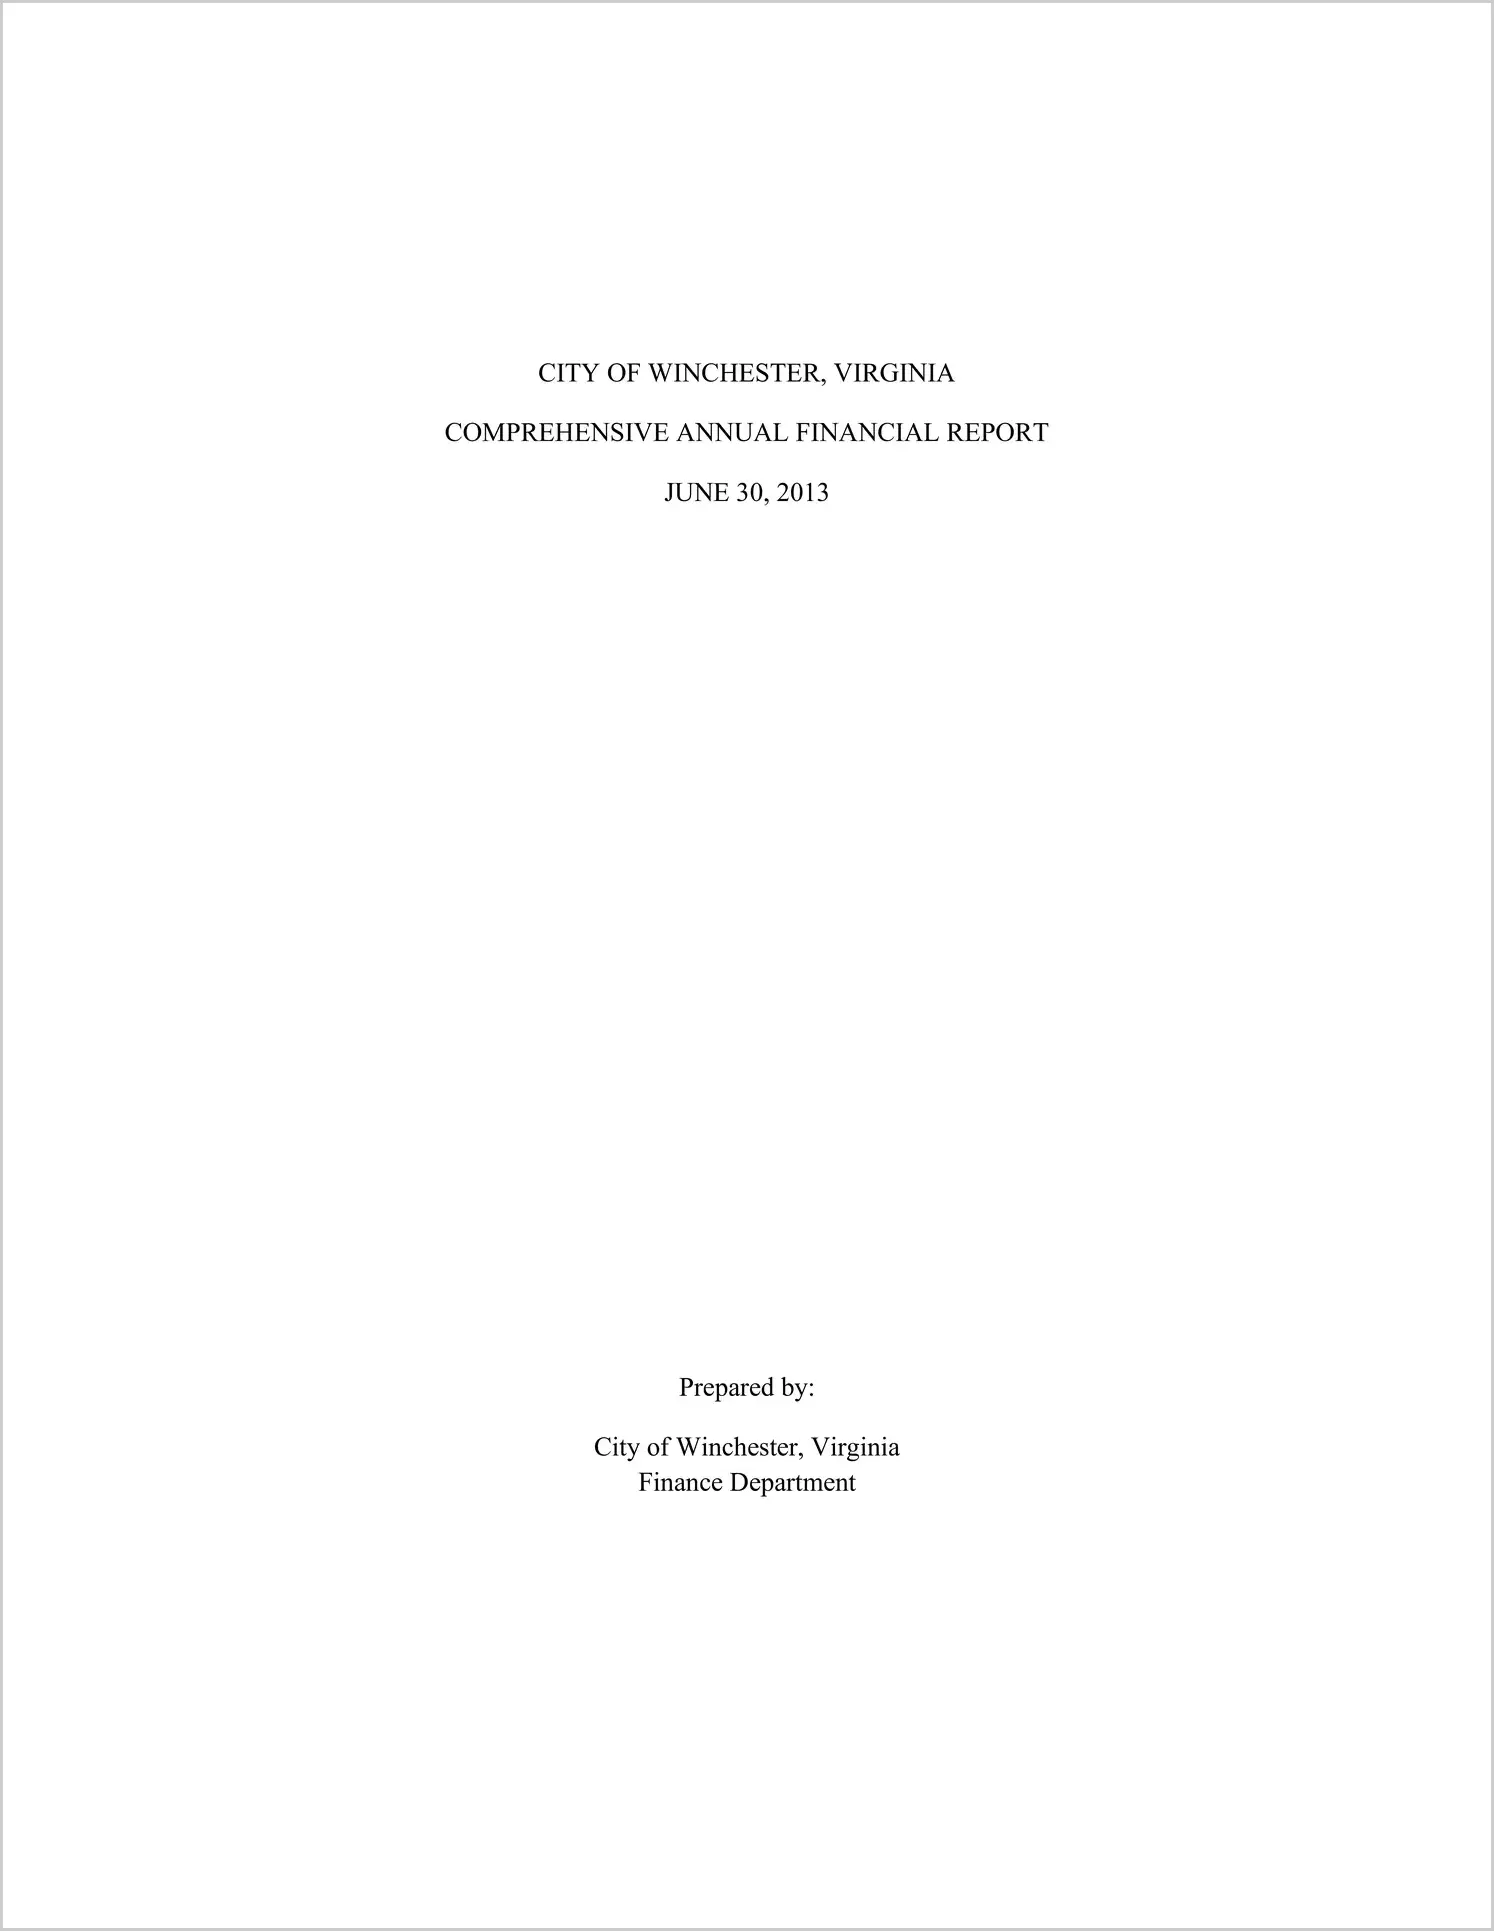 2013 Annual Financial Report for City of Winchester